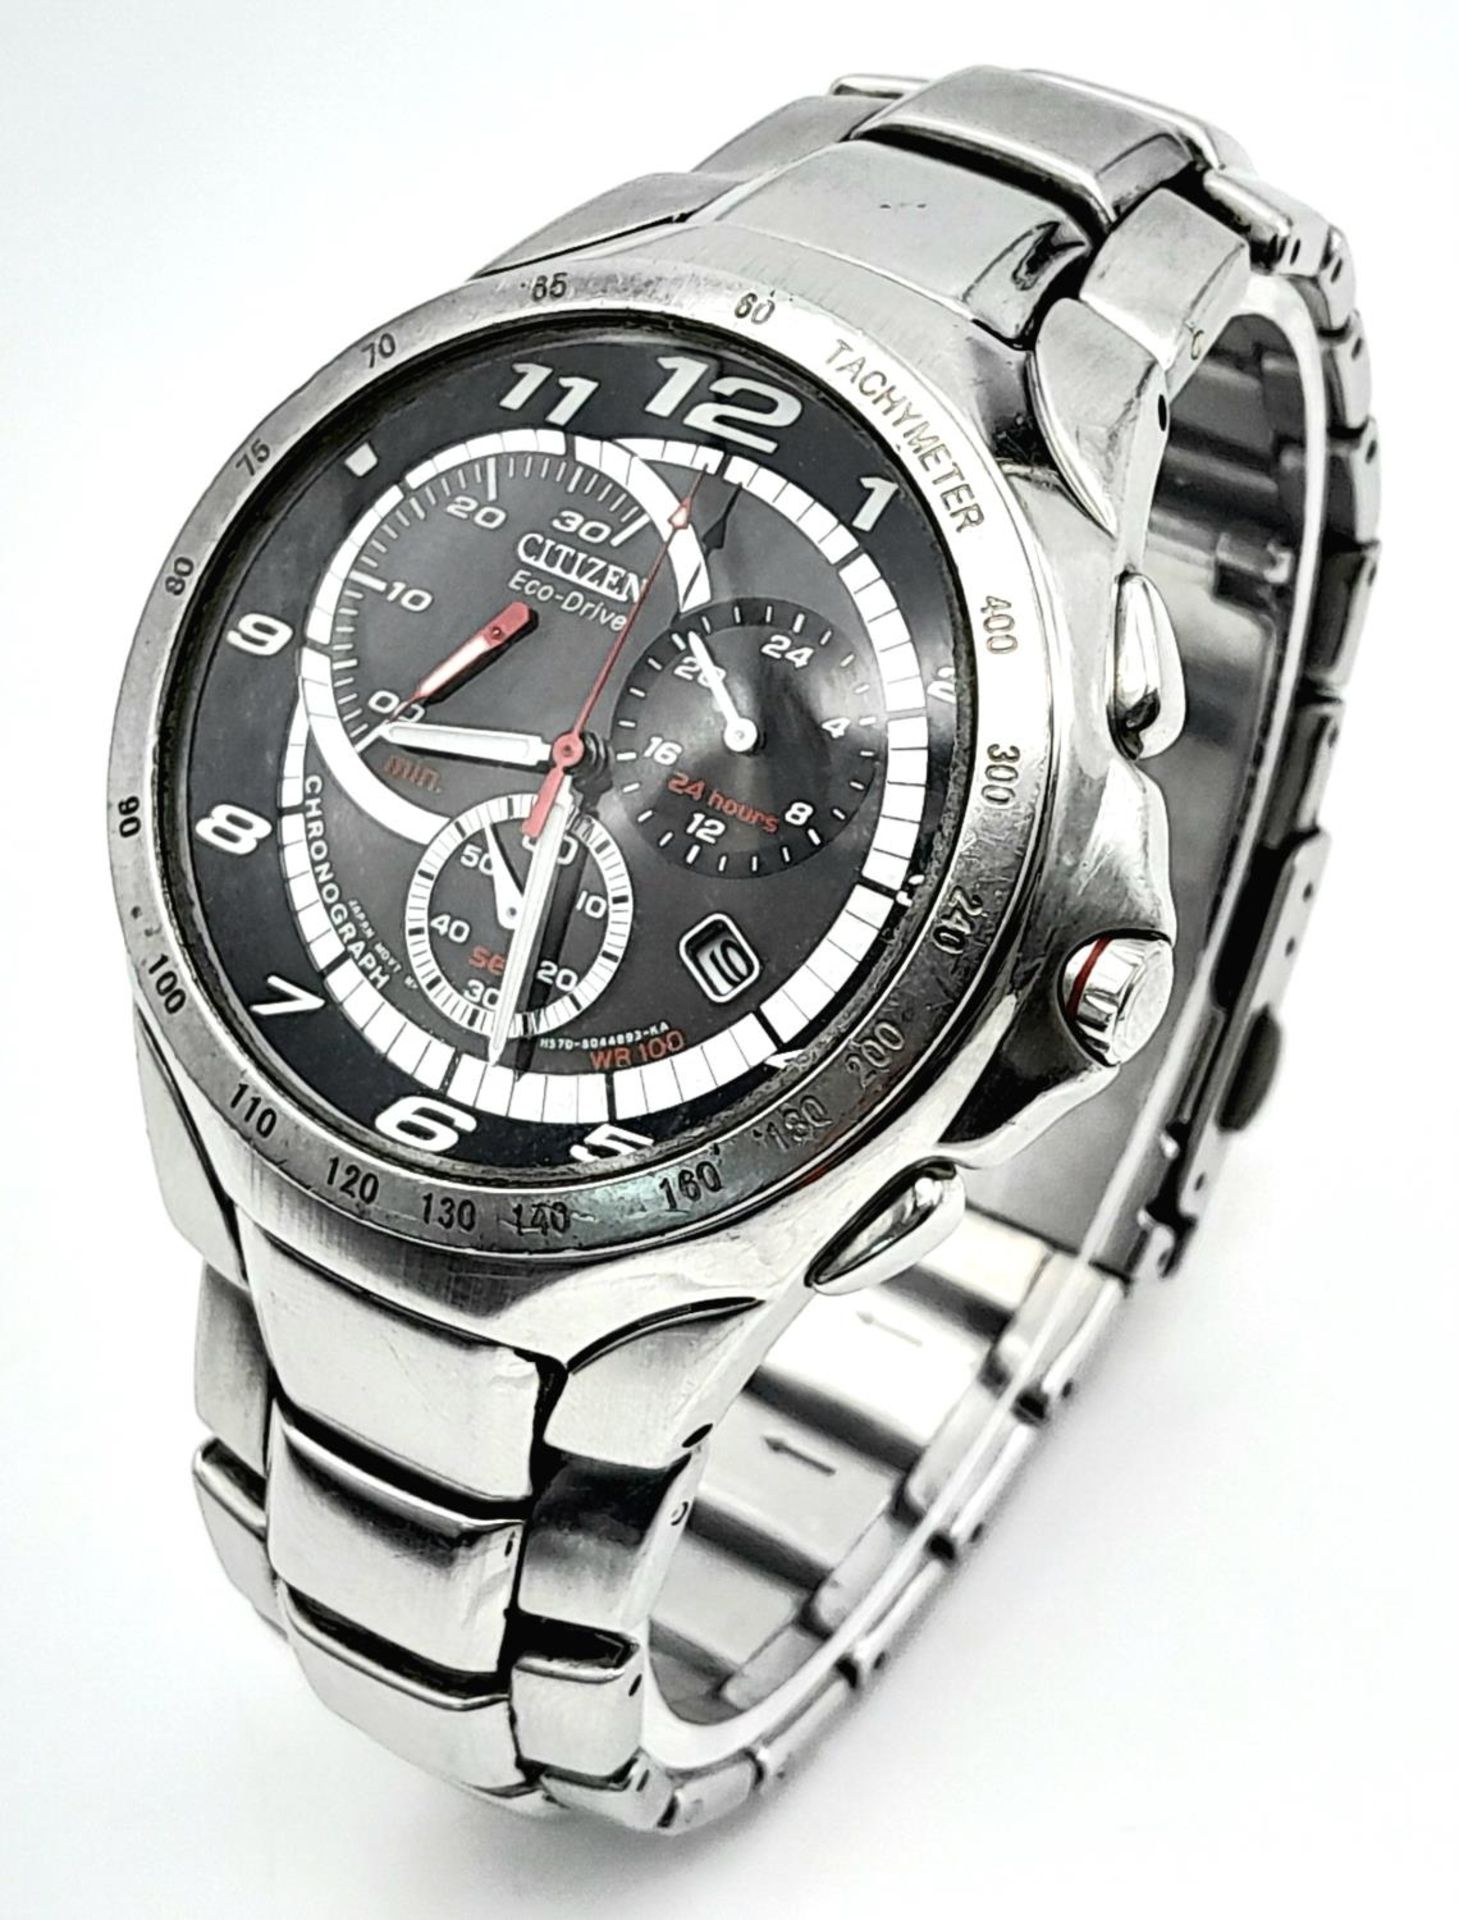 A Citizen Eco Drive Chronograph Gents Watch. Stainless steel bracelet and case - 42mm. Black dial